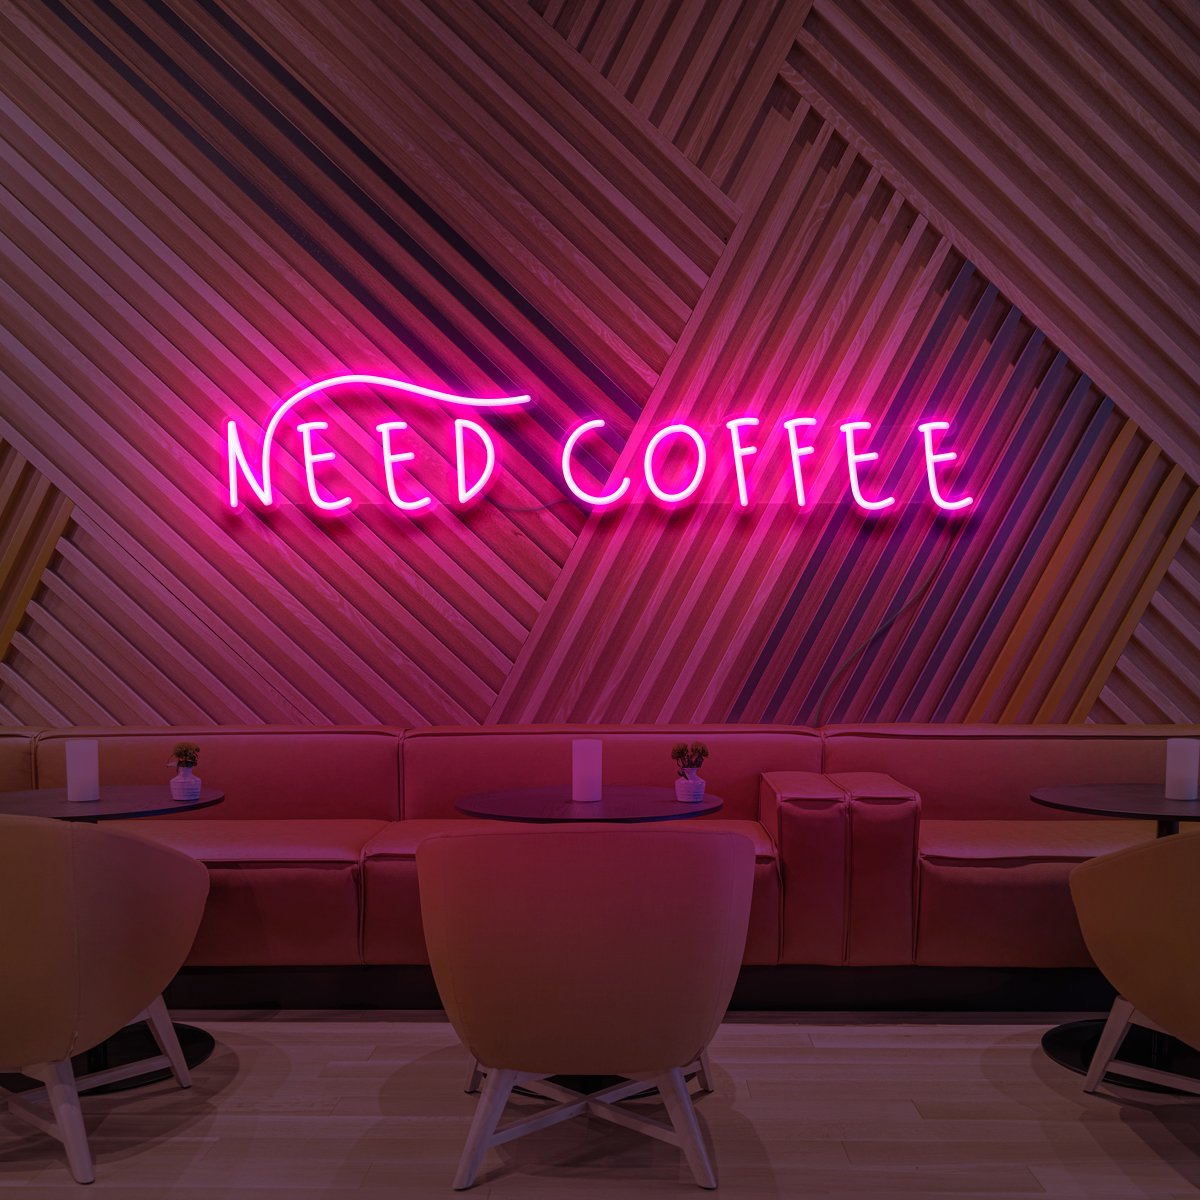 "Need Coffee" Neon Sign for Cafés 60cm (2ft) / Pink / LED Neon by Neon Icons